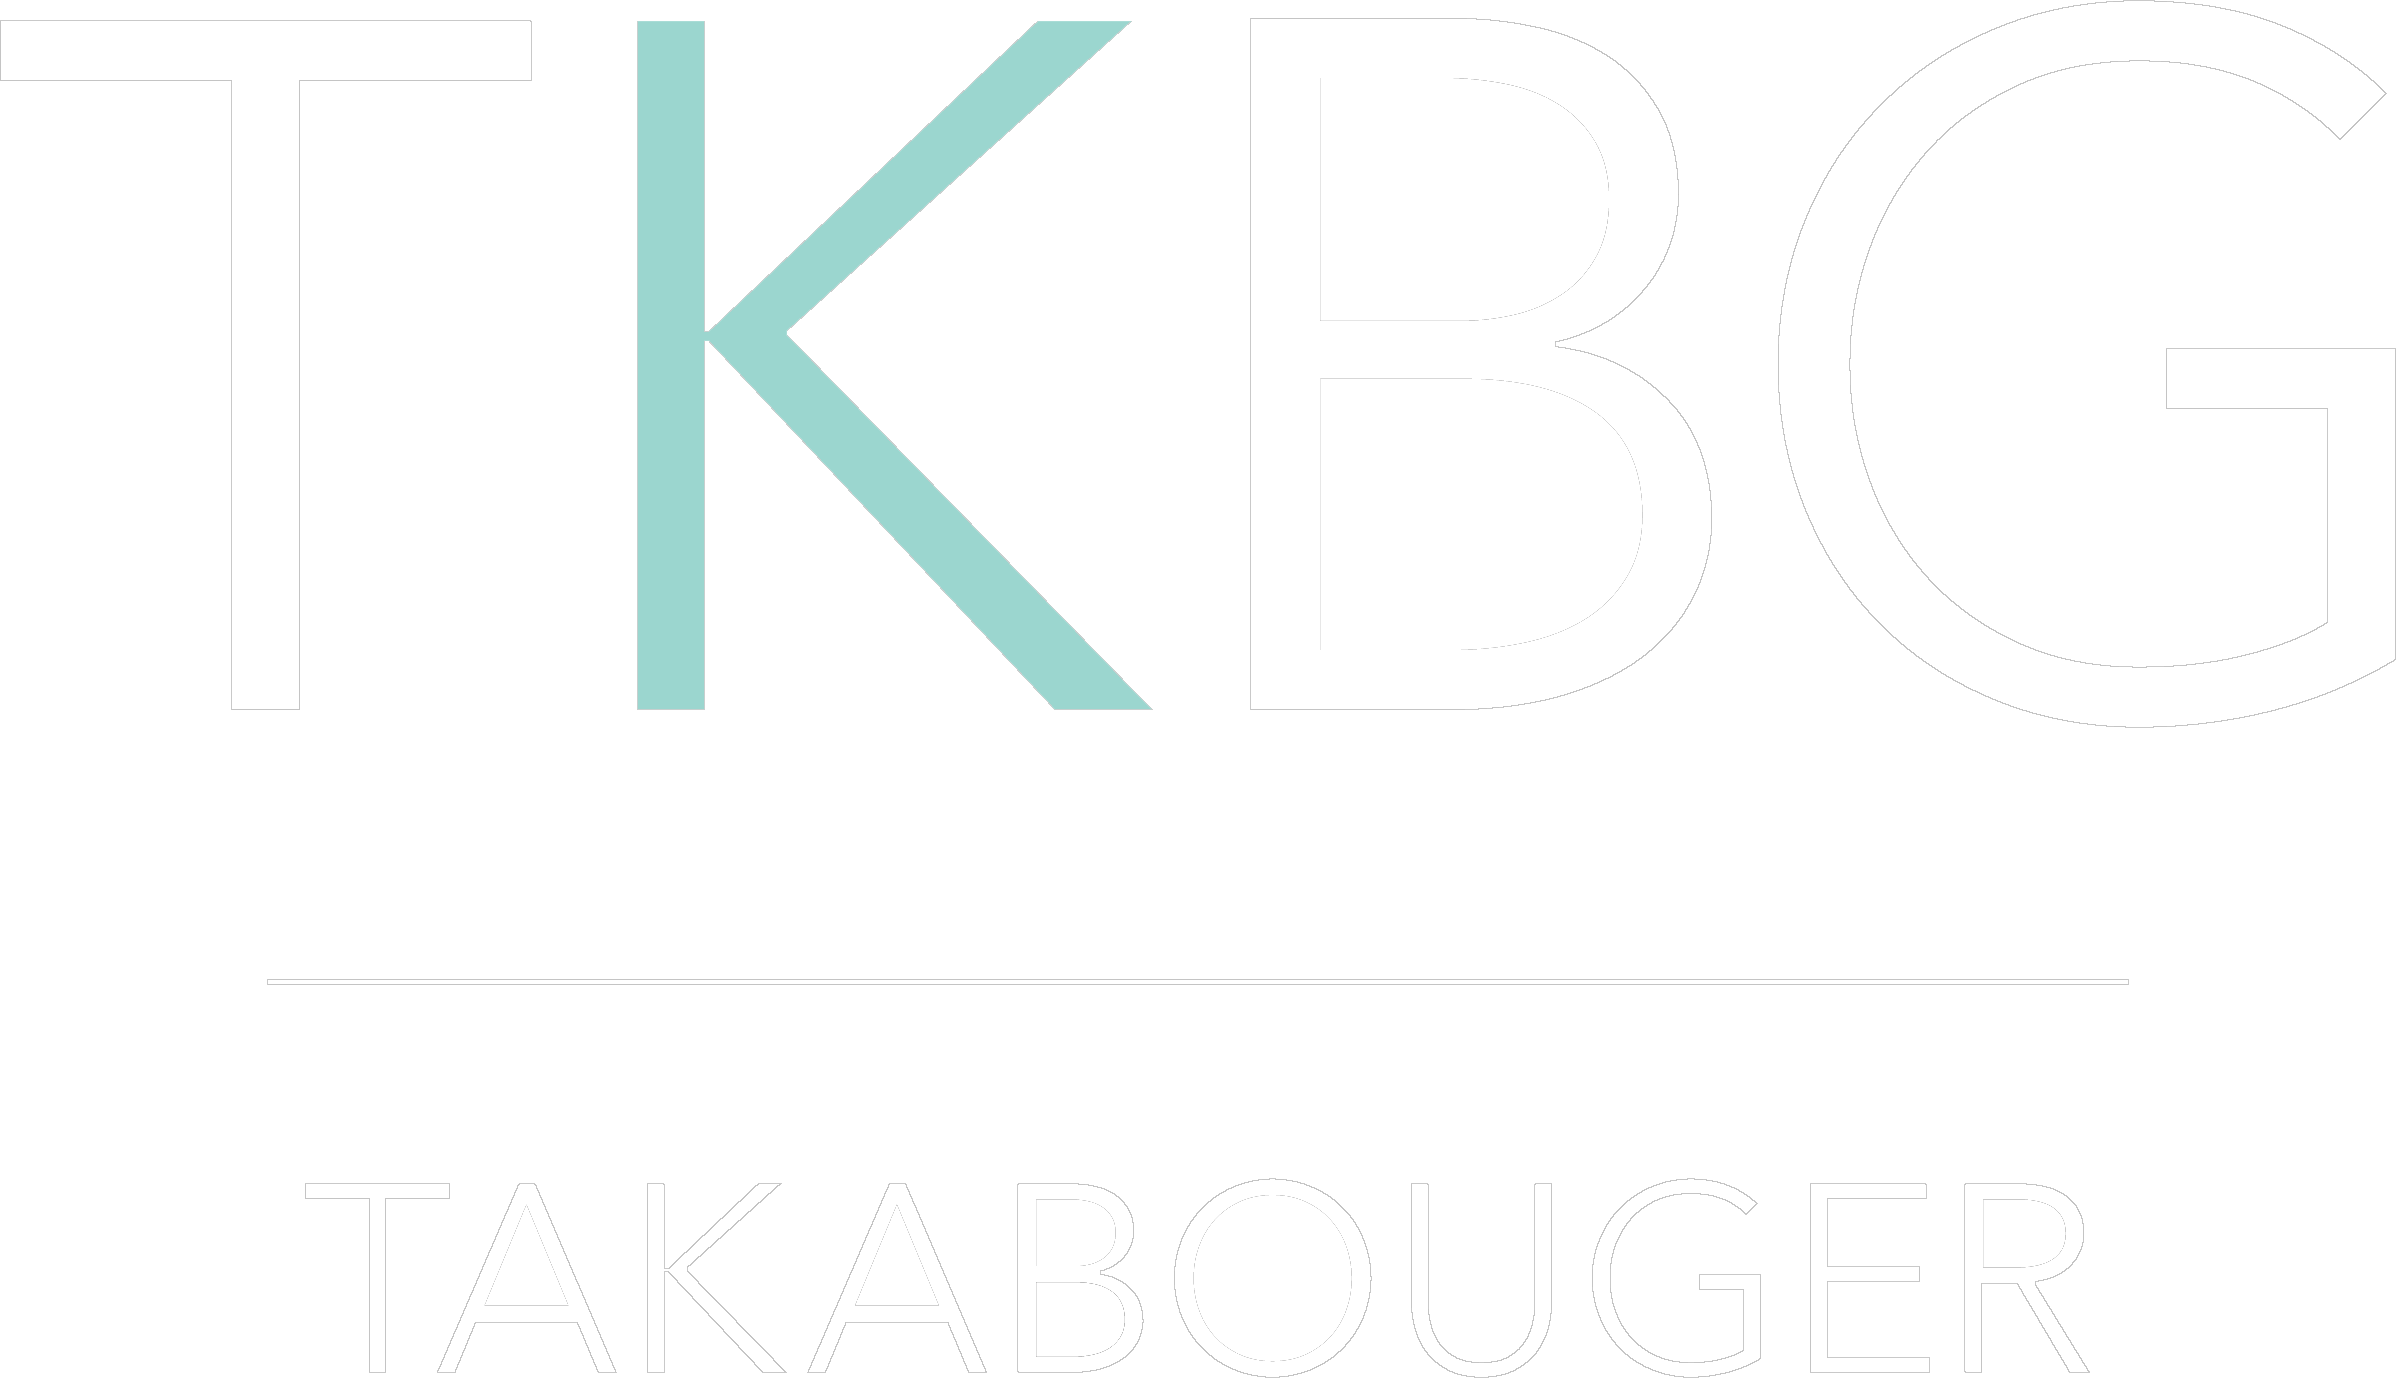 Takabouger